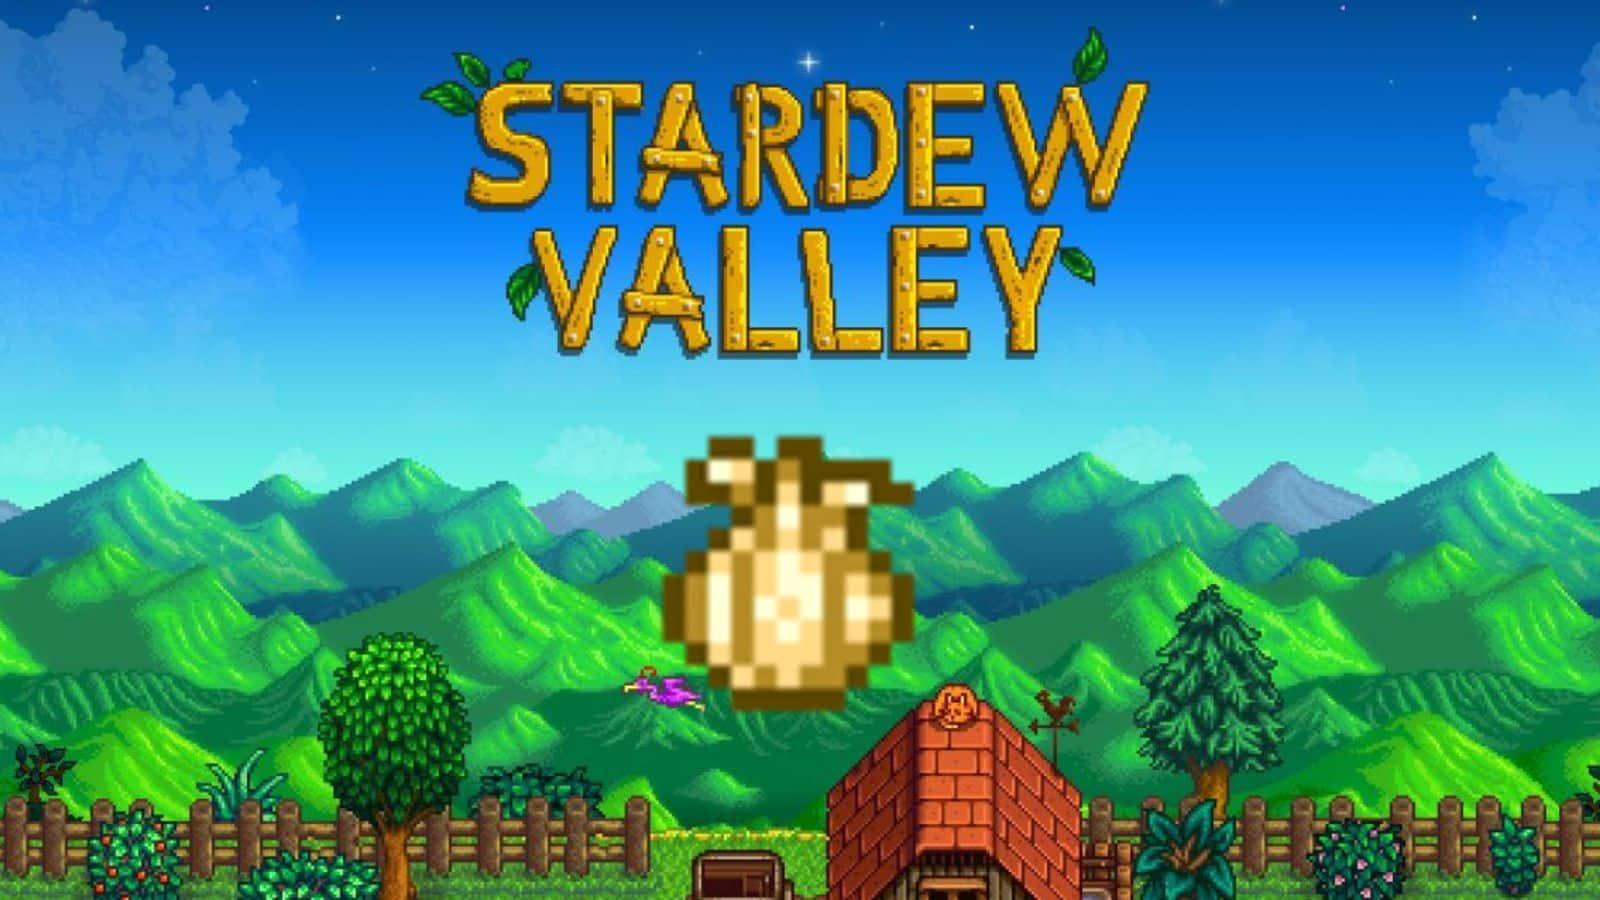 Stardew Valley loading screen with garlic over the top